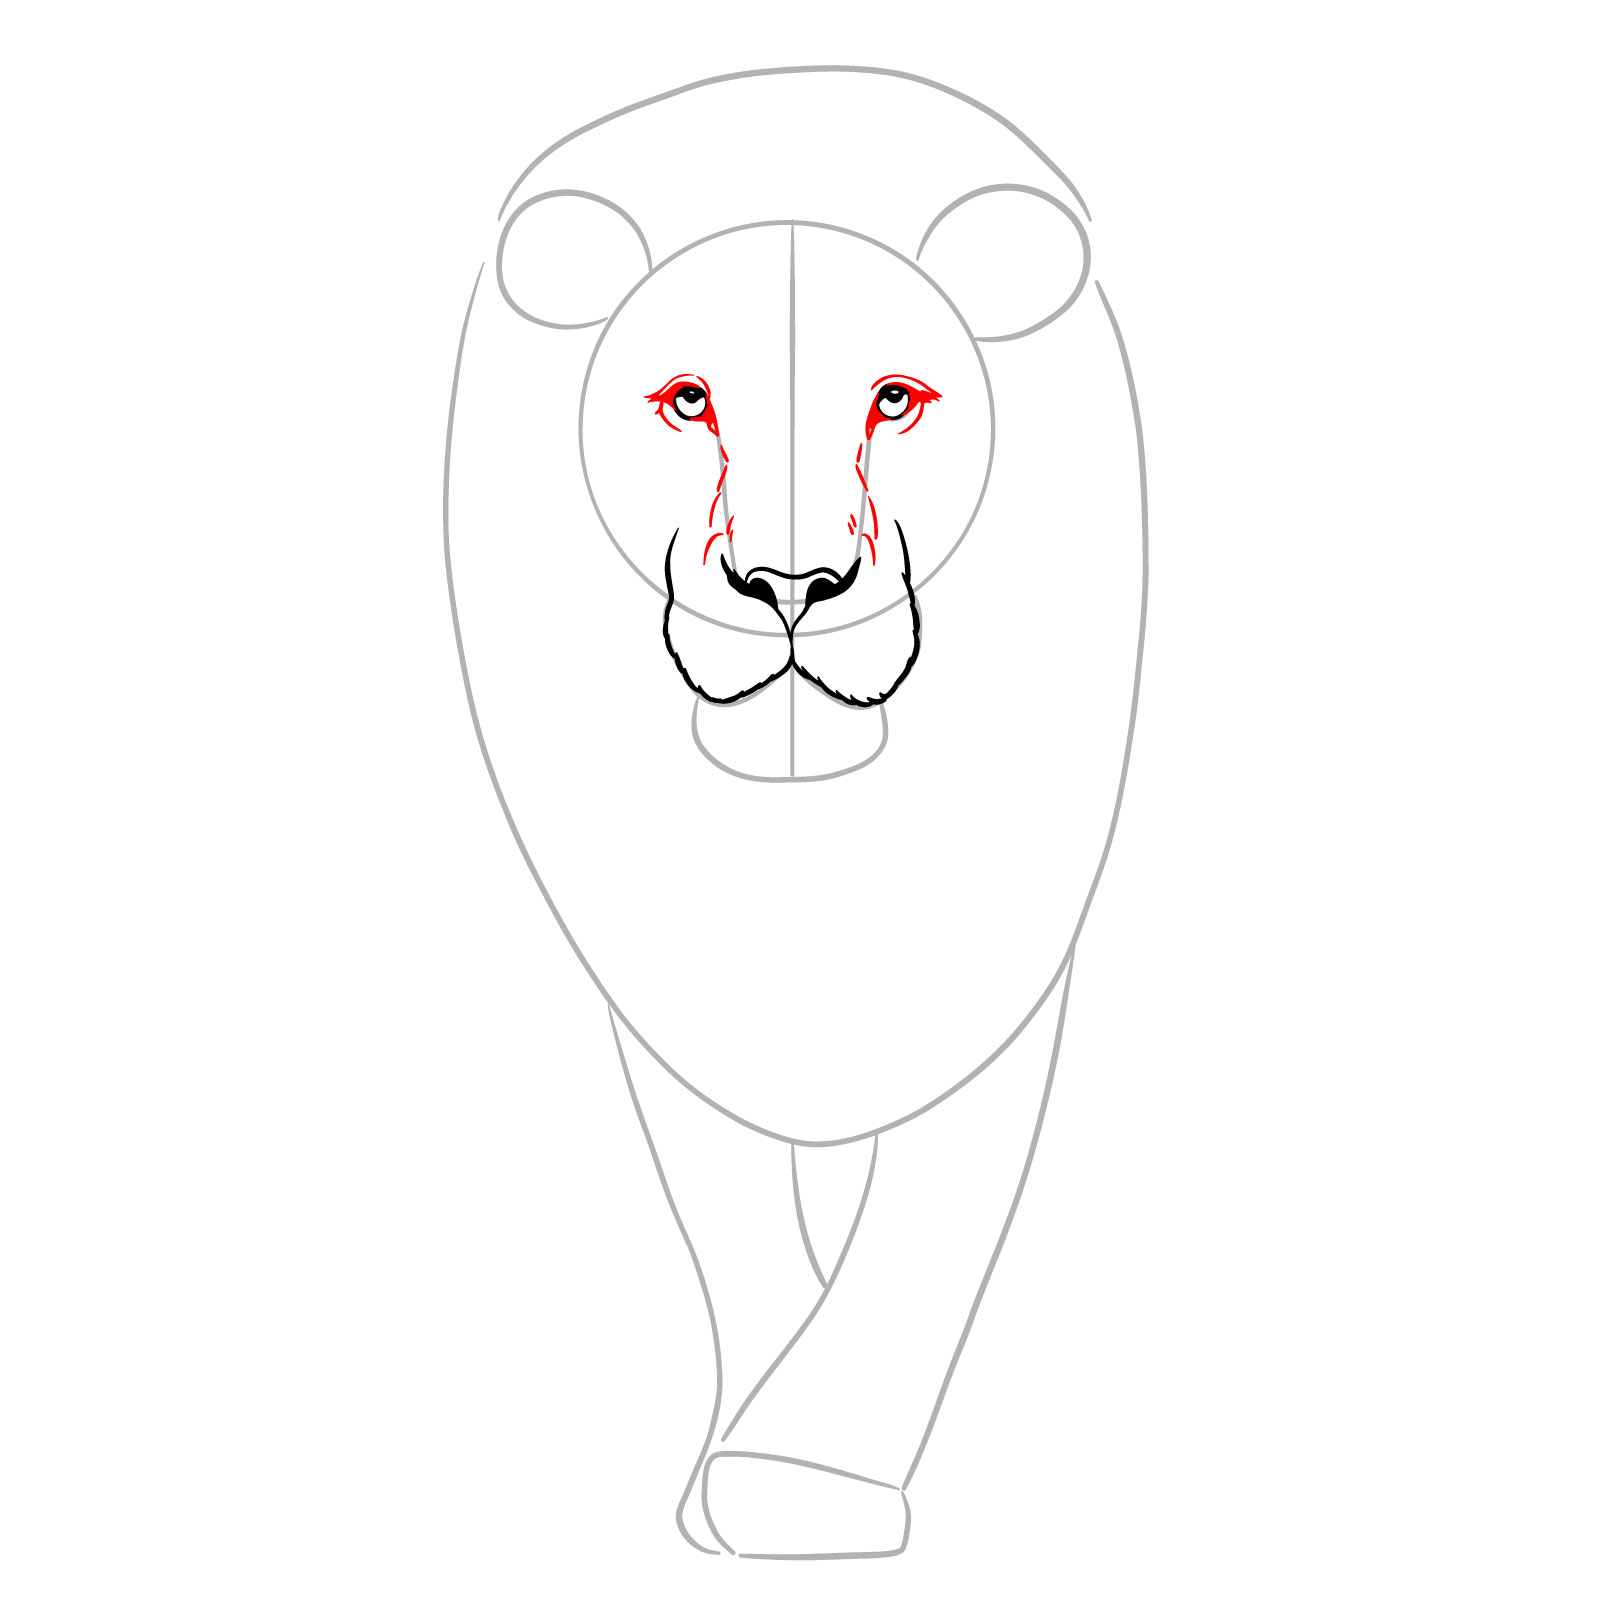 Adding details to the eyes and nose bridge in a walking lion sketch - step 05